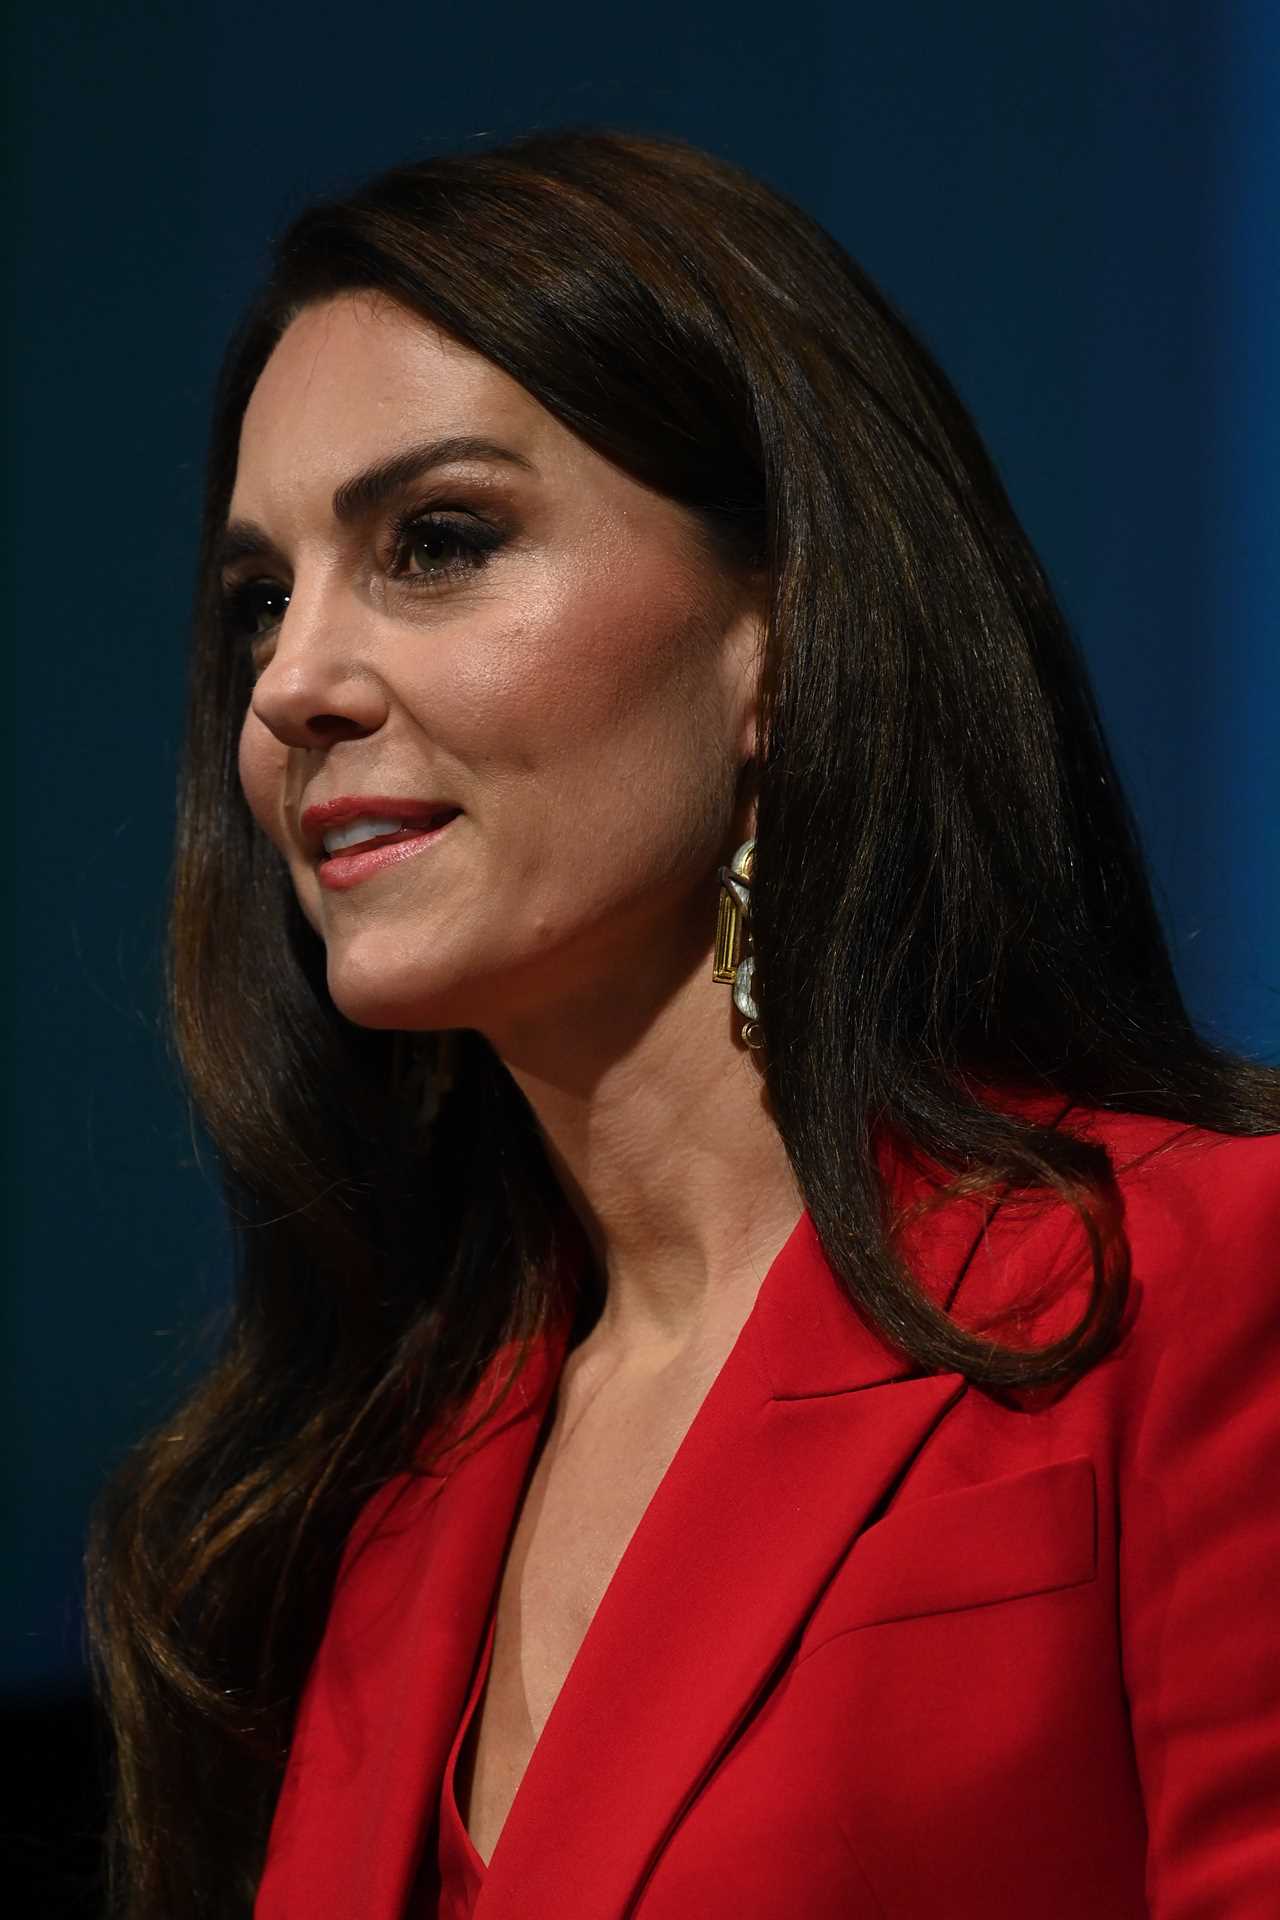 Kate Middleton dazzles in a red suit as she joins Prince William at star-studded gala